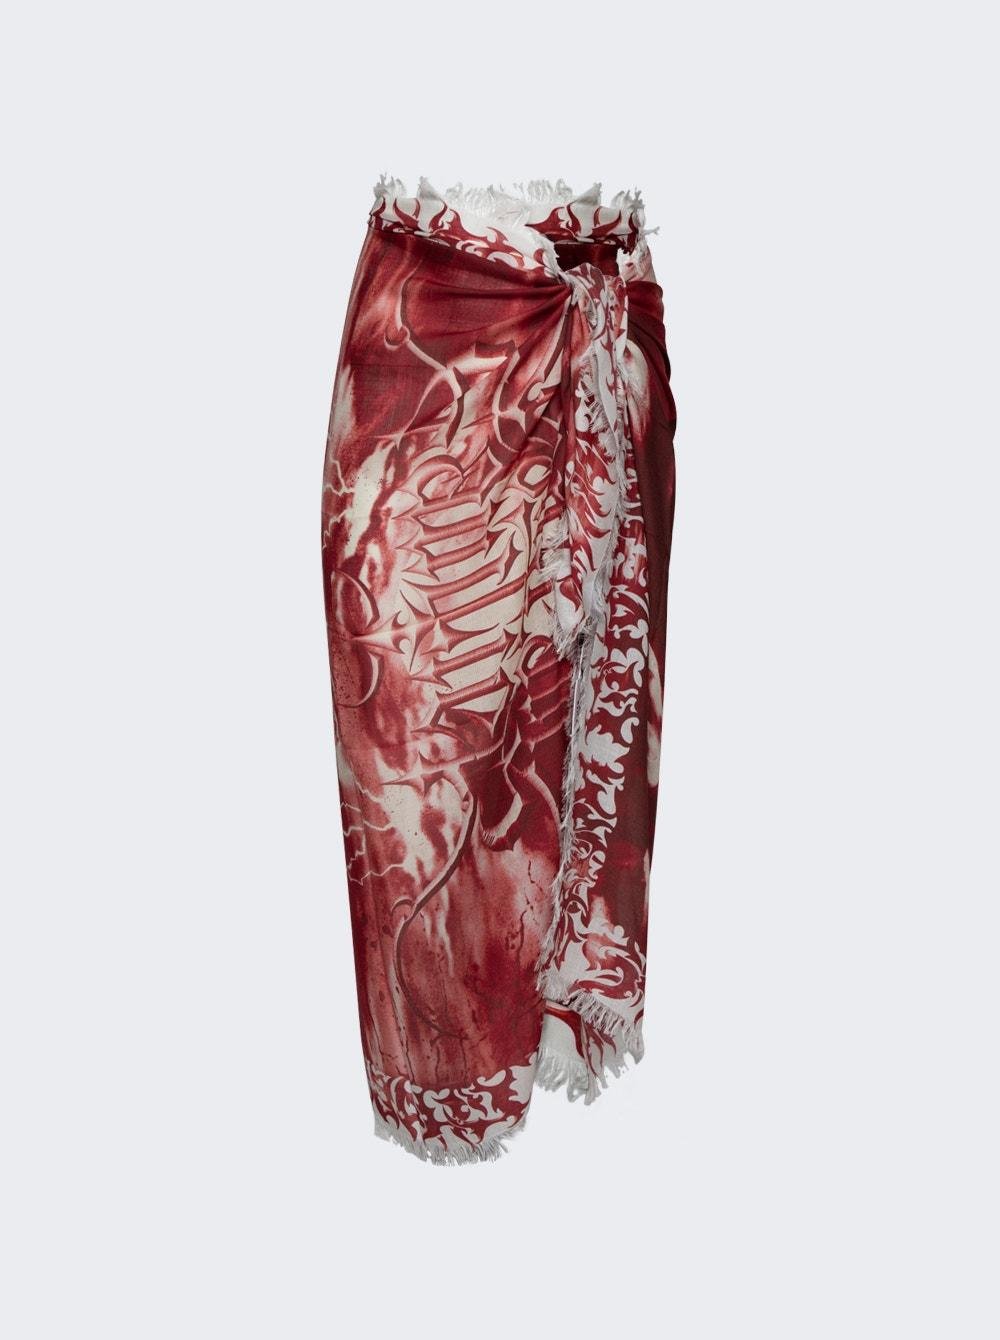 TrÈs Gaultier #1 Diablo Printed Pareo White And Red  | The Webster by JEAN PAUL GAULTIER